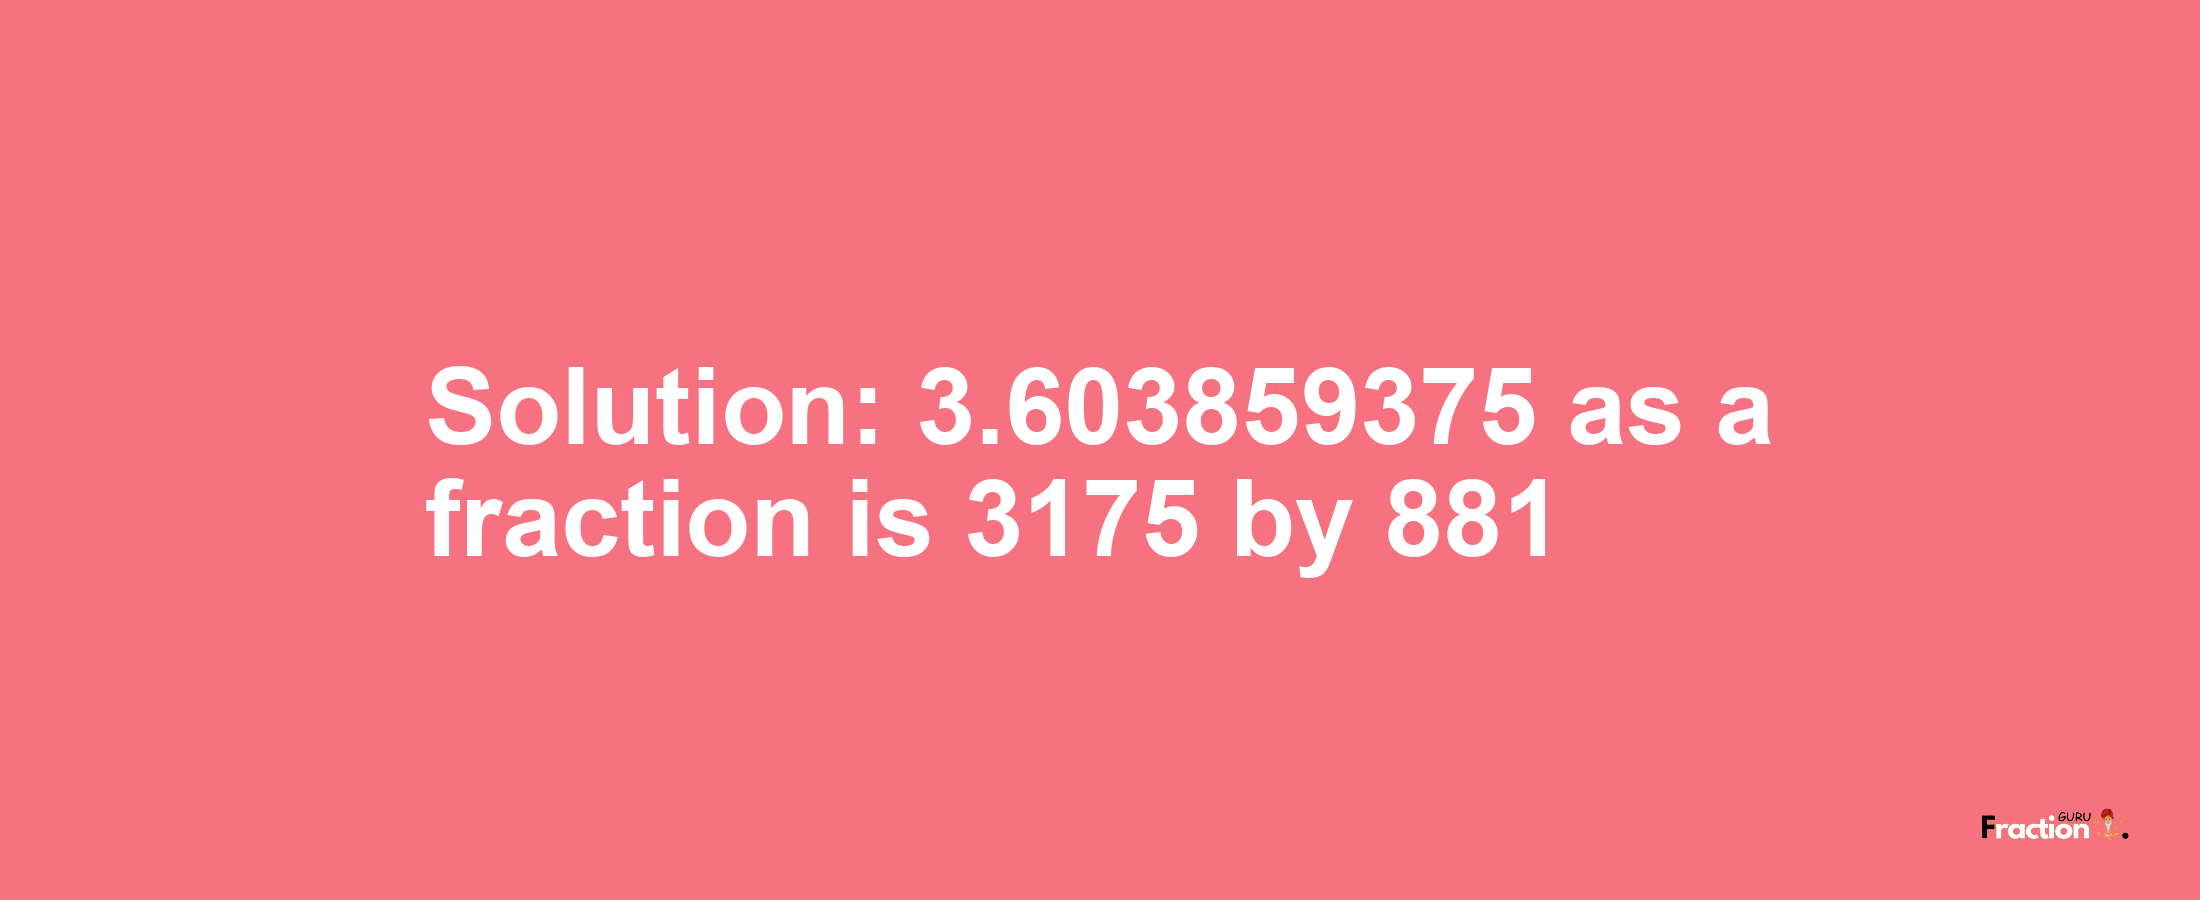 Solution:3.603859375 as a fraction is 3175/881